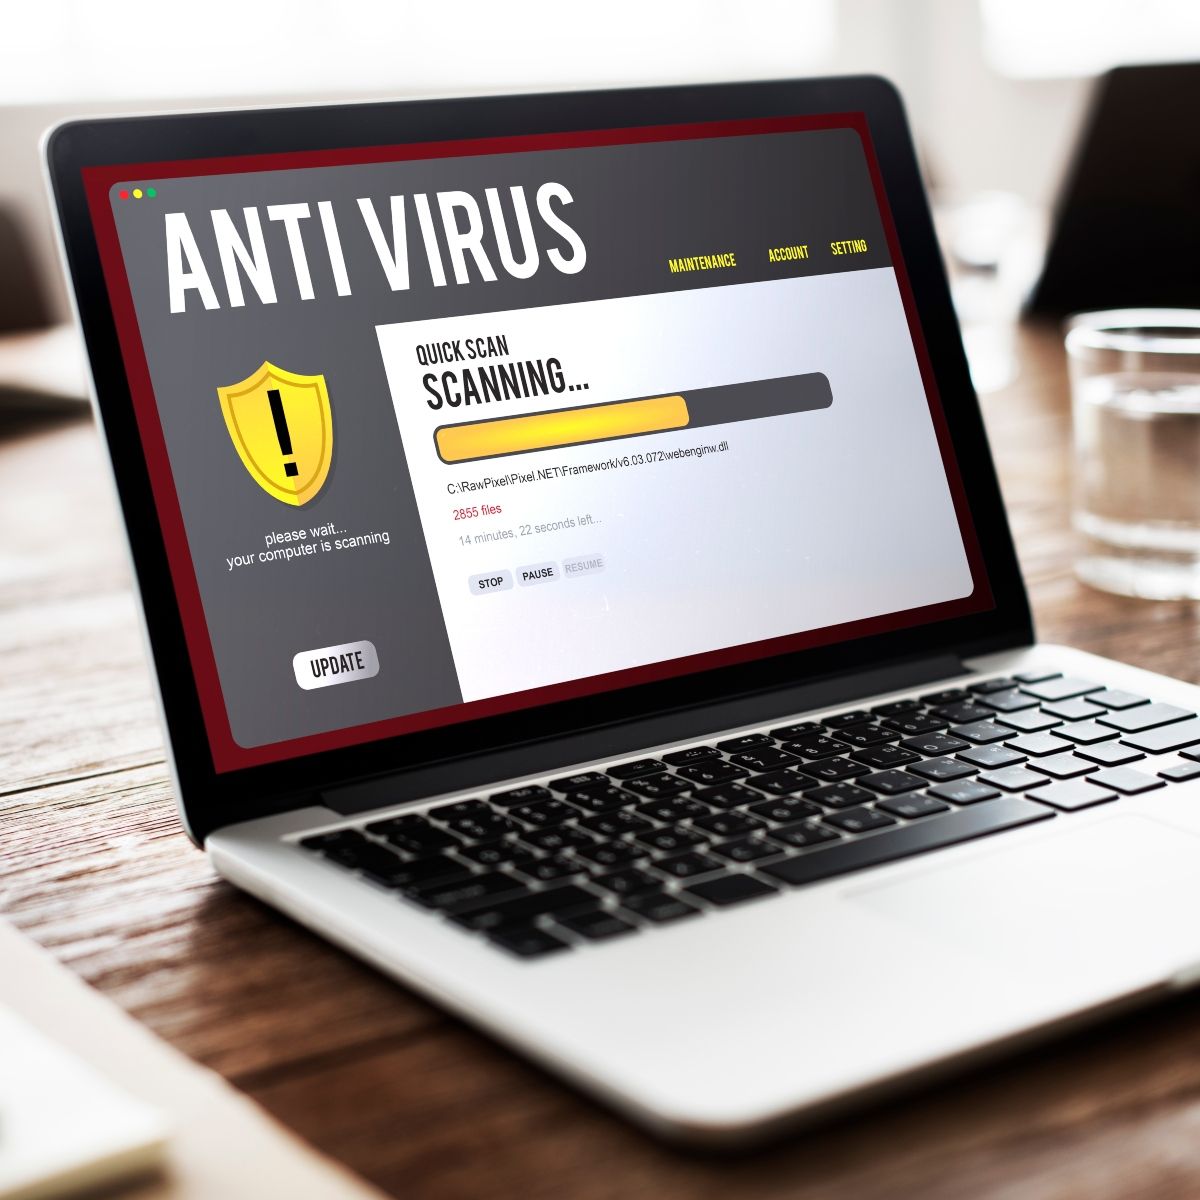 What Are Some Of The Shortcomings Of Antivirus Software Today? Check All That Apply.